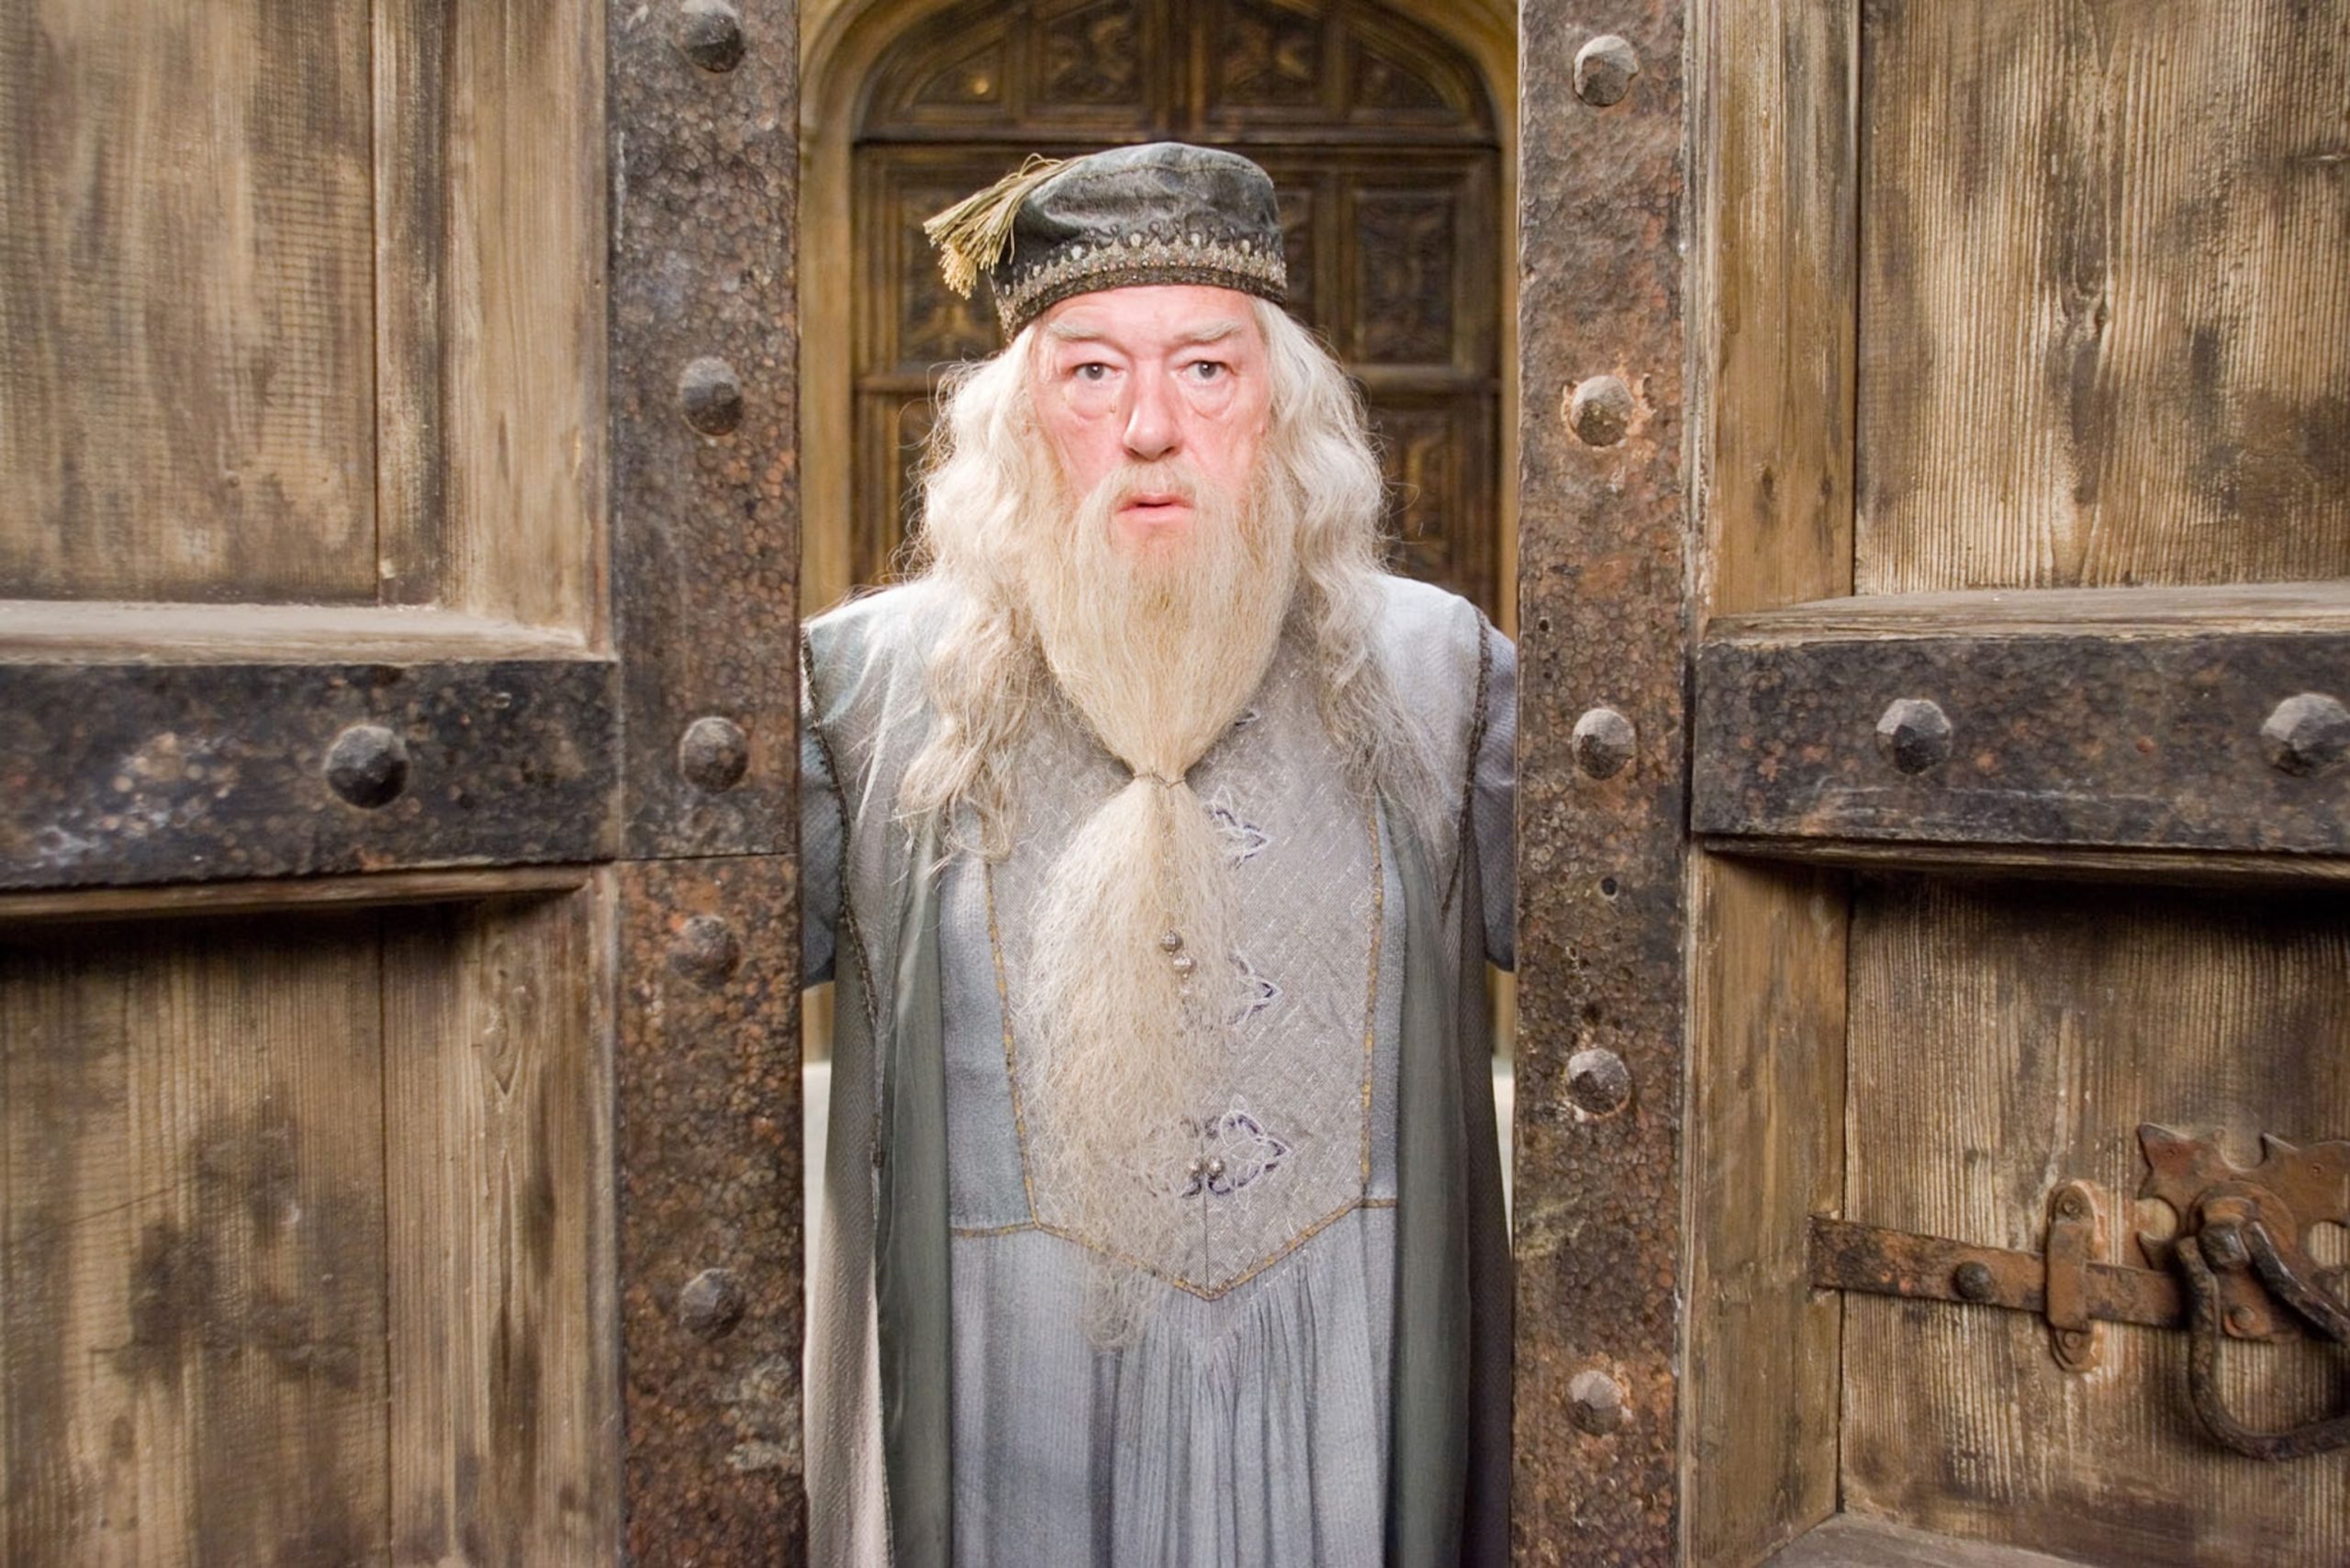 Actor Michael Gambon, known for his portrayal of Dumbledore in 'Harry Potter', passes away at the age of 82